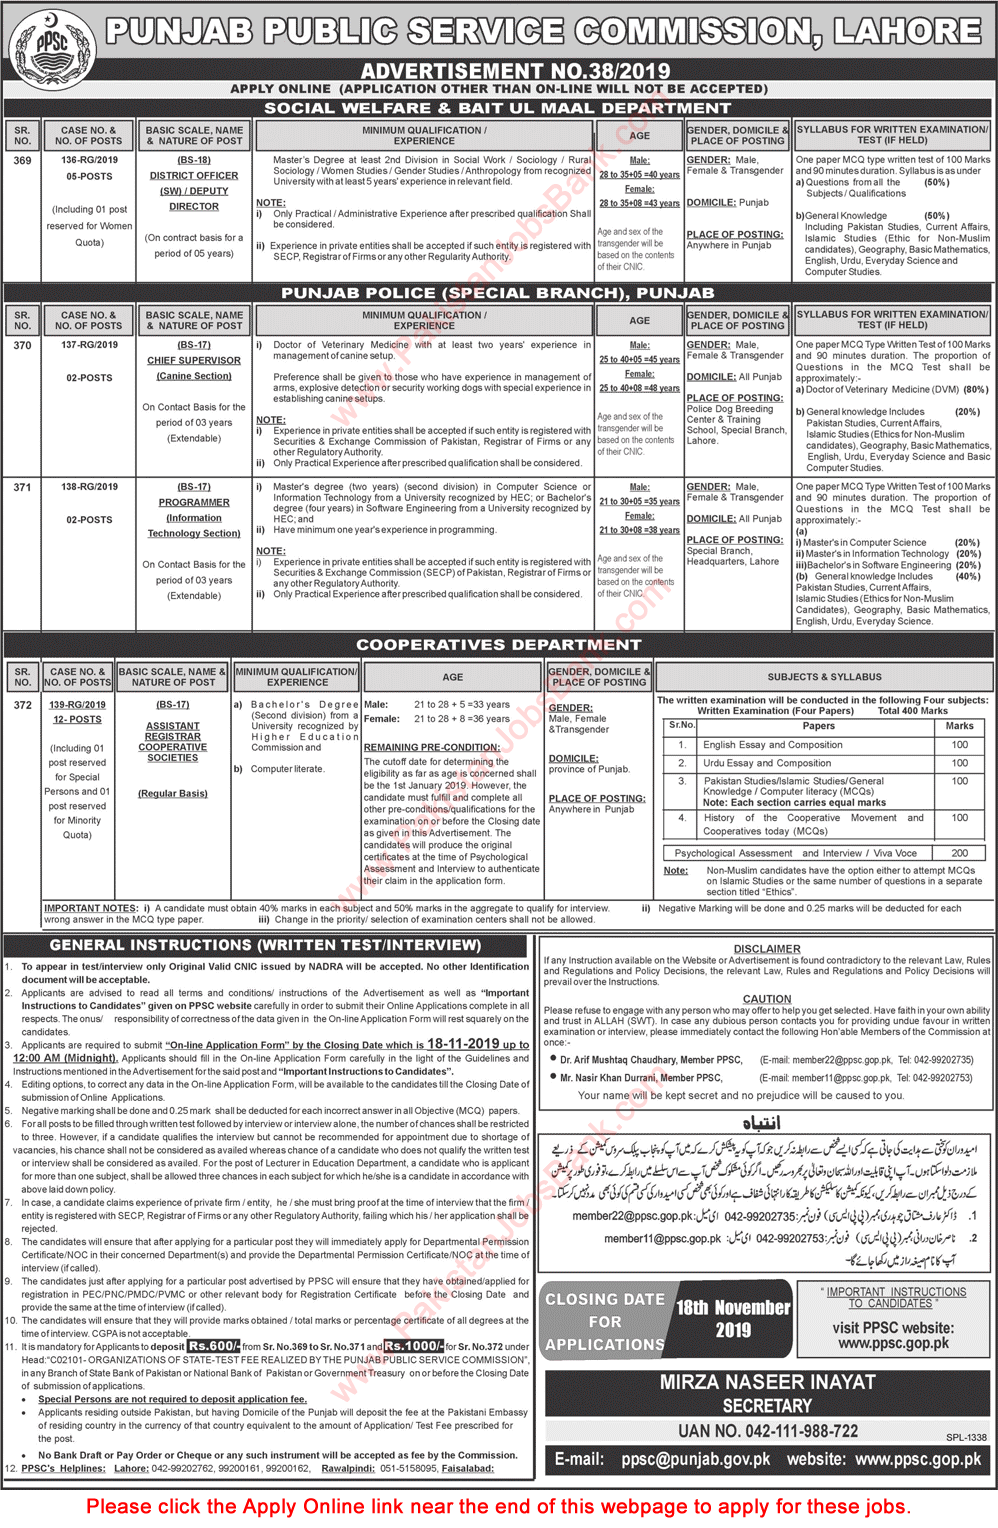 PPSC Jobs November 2019 Apply Online Consolidated Advertisement No 38/2019 Latest